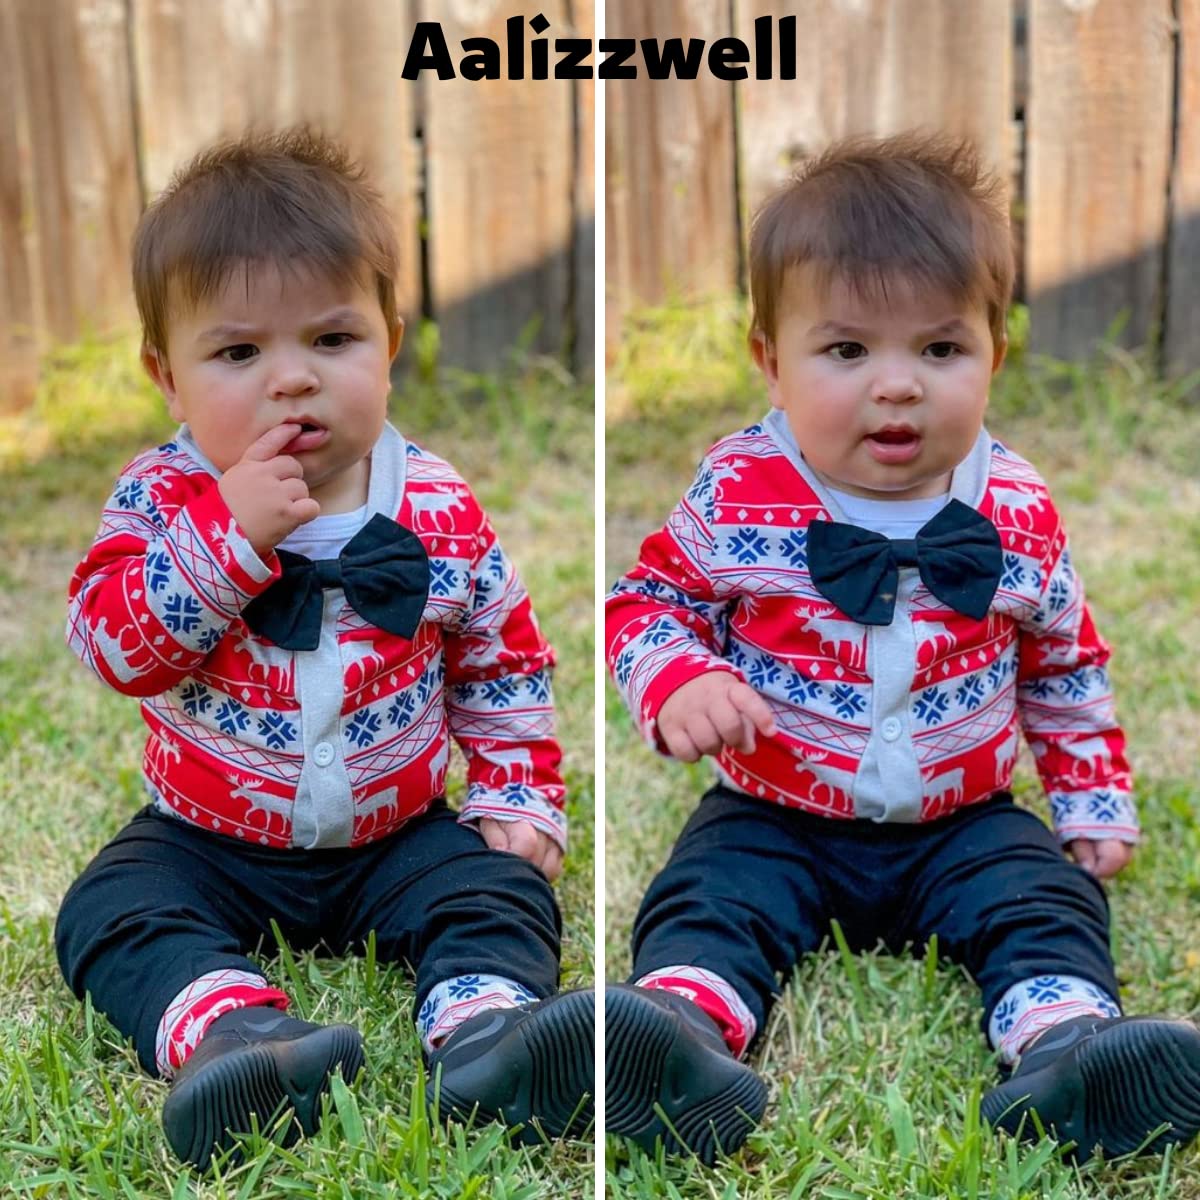 Aalizzwell Newborn Baby Boy Christmas Clothes Pants 3 Piece Outfit